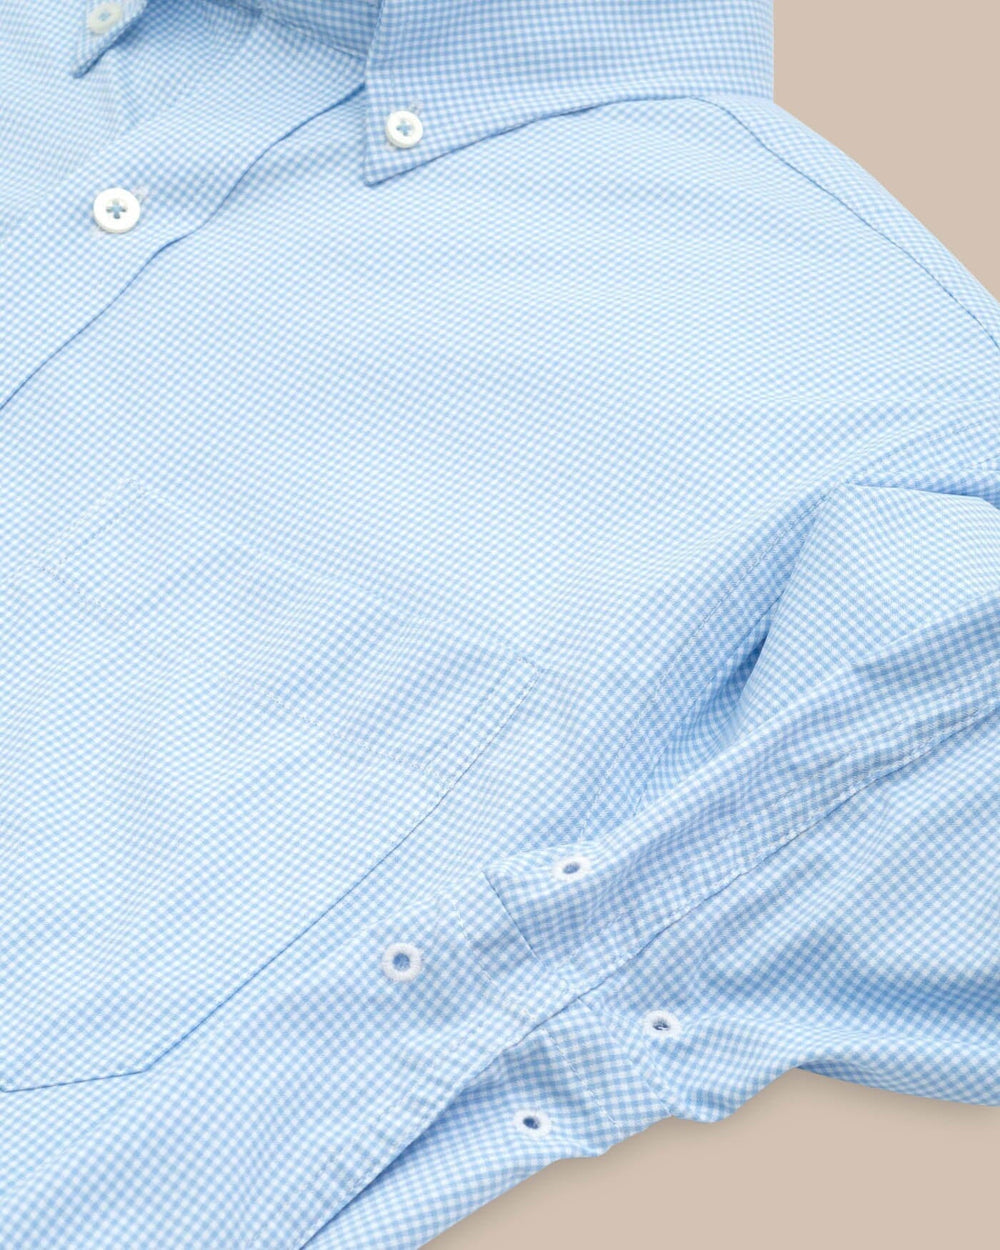 The detail view of the Southern Tide Team Colors Gingham Intercoastal Sport Shirt by Southern Tide - Tide Blue